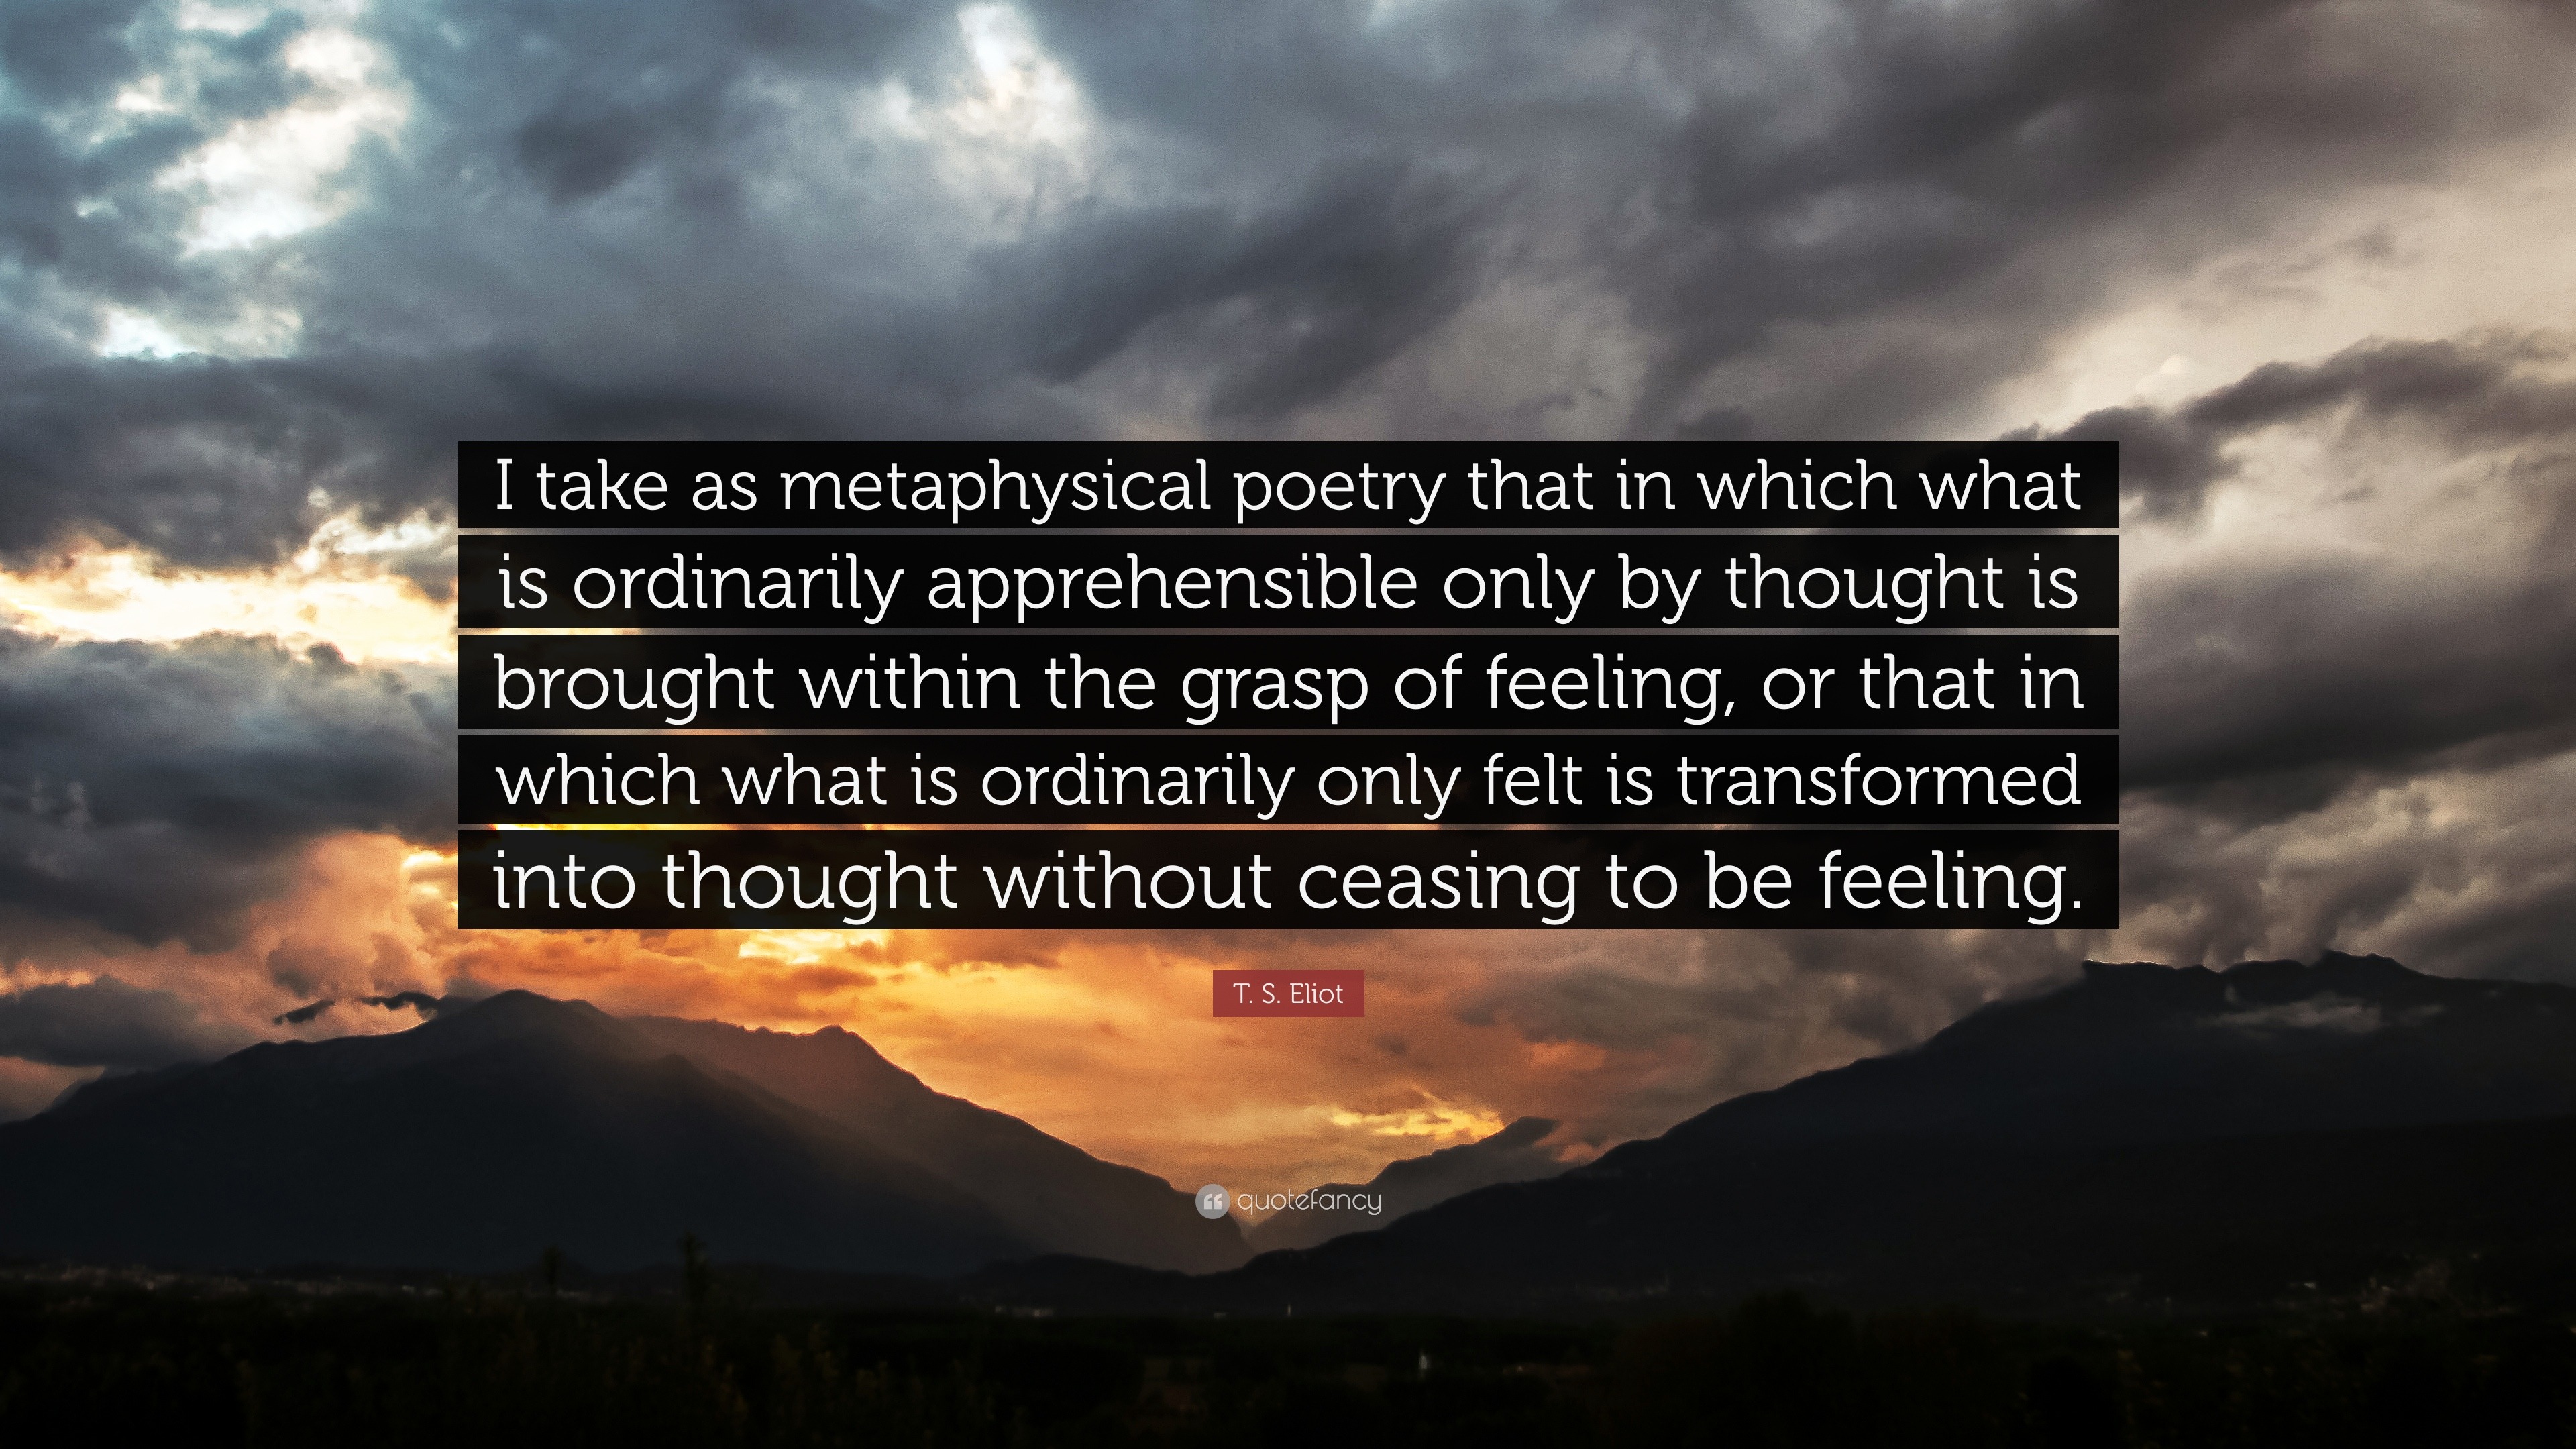 metaphysical poetry images